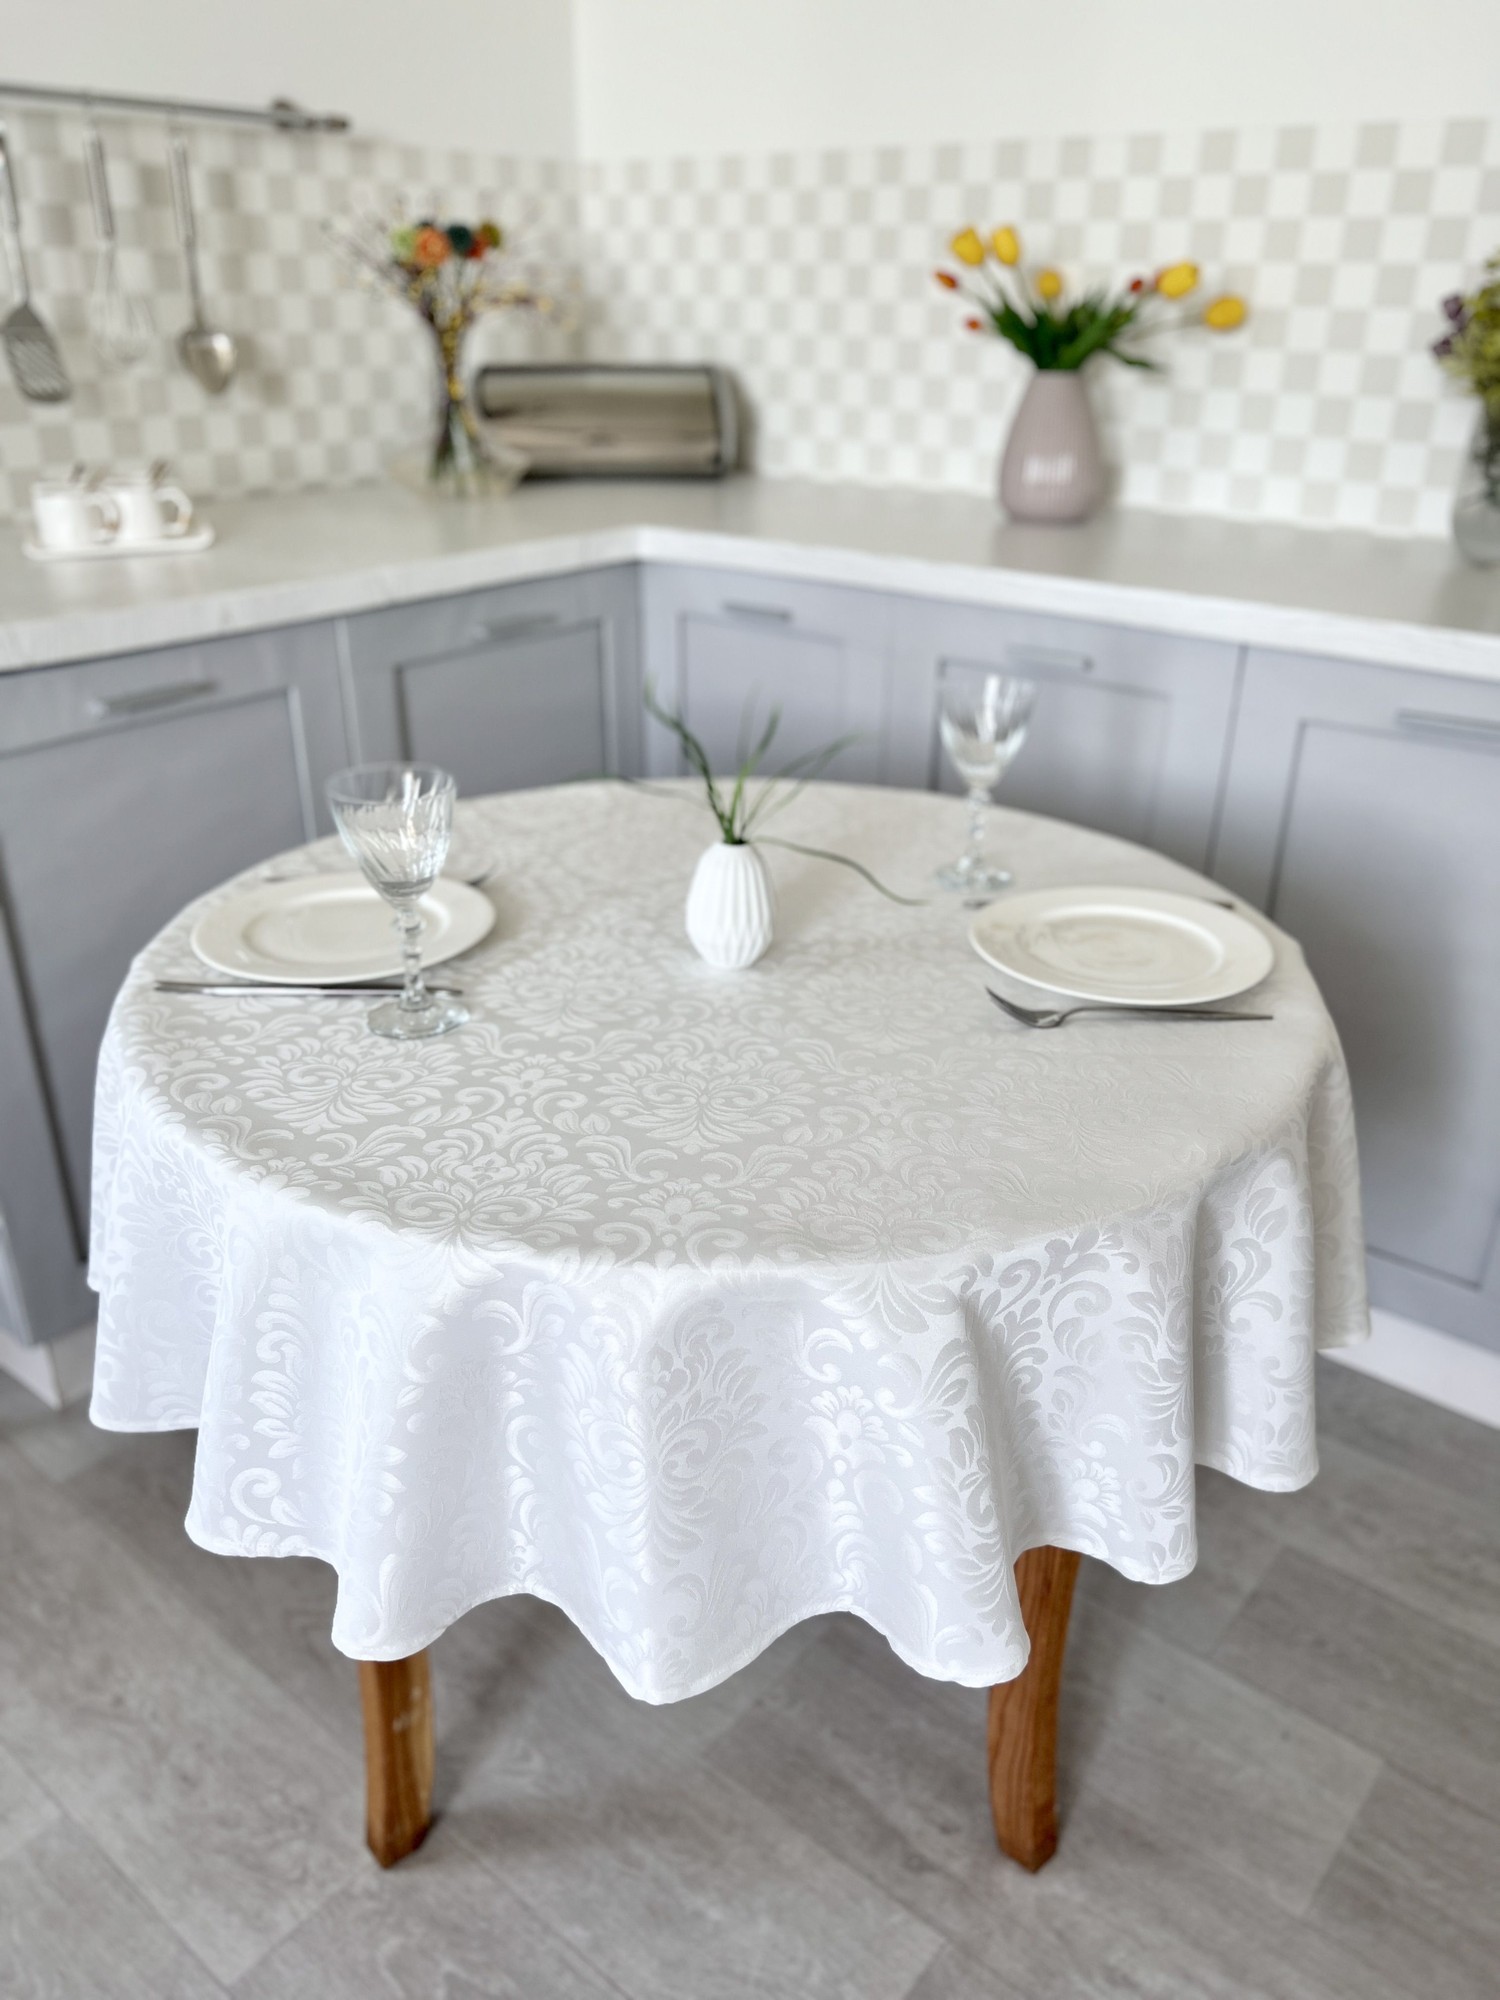 Teflon coated tablecloth ø138 cm. (54 in.) for a round table